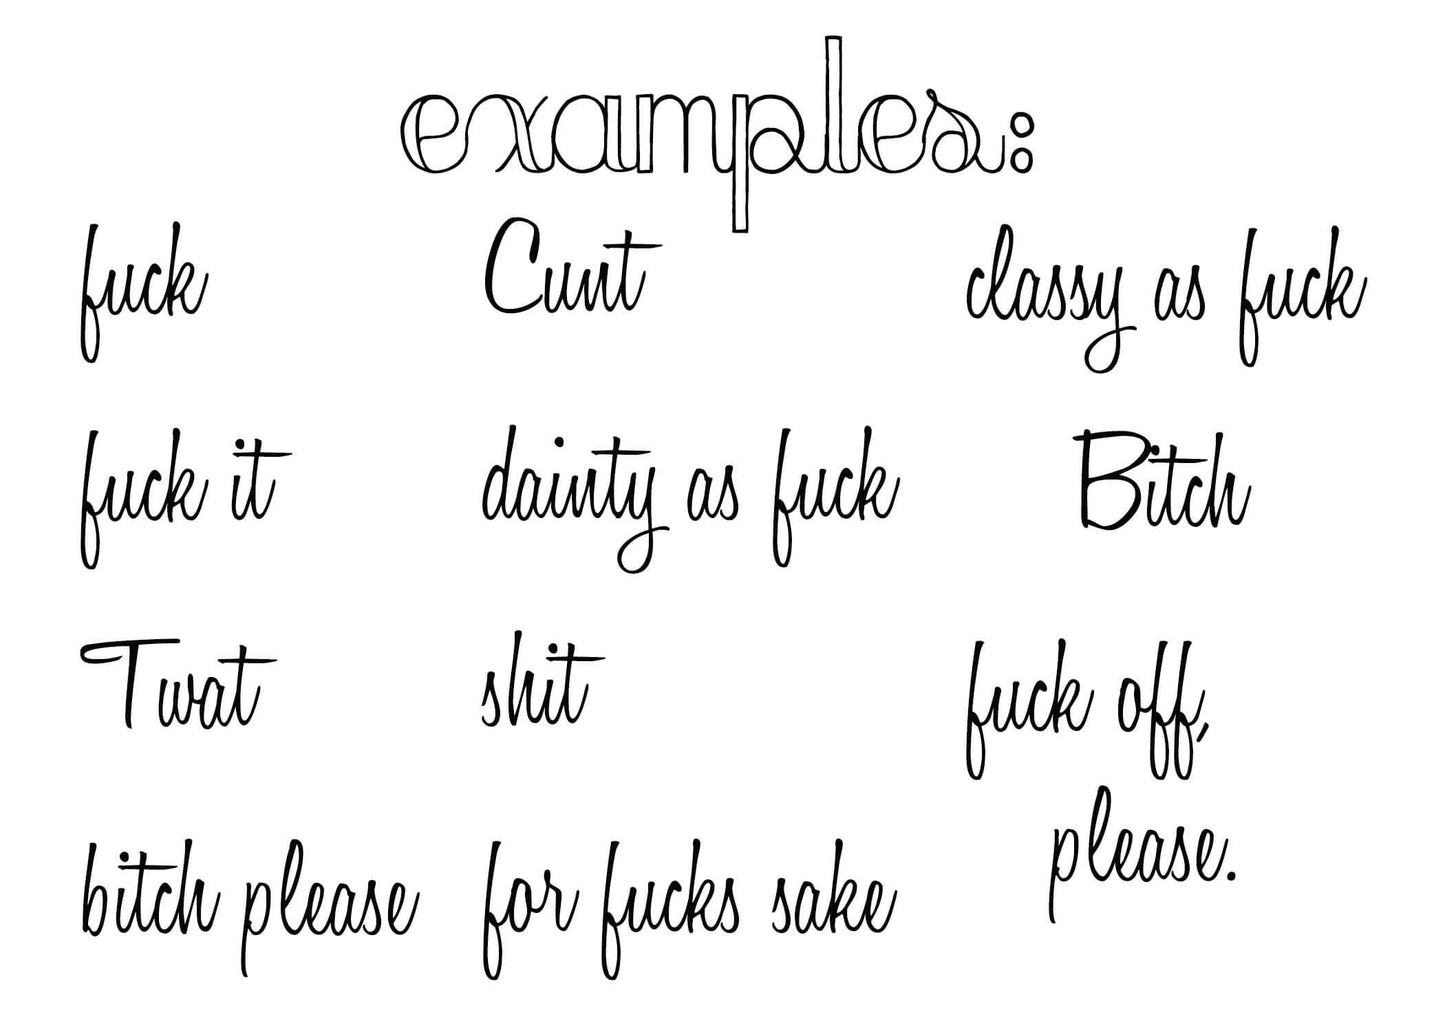 swear examples